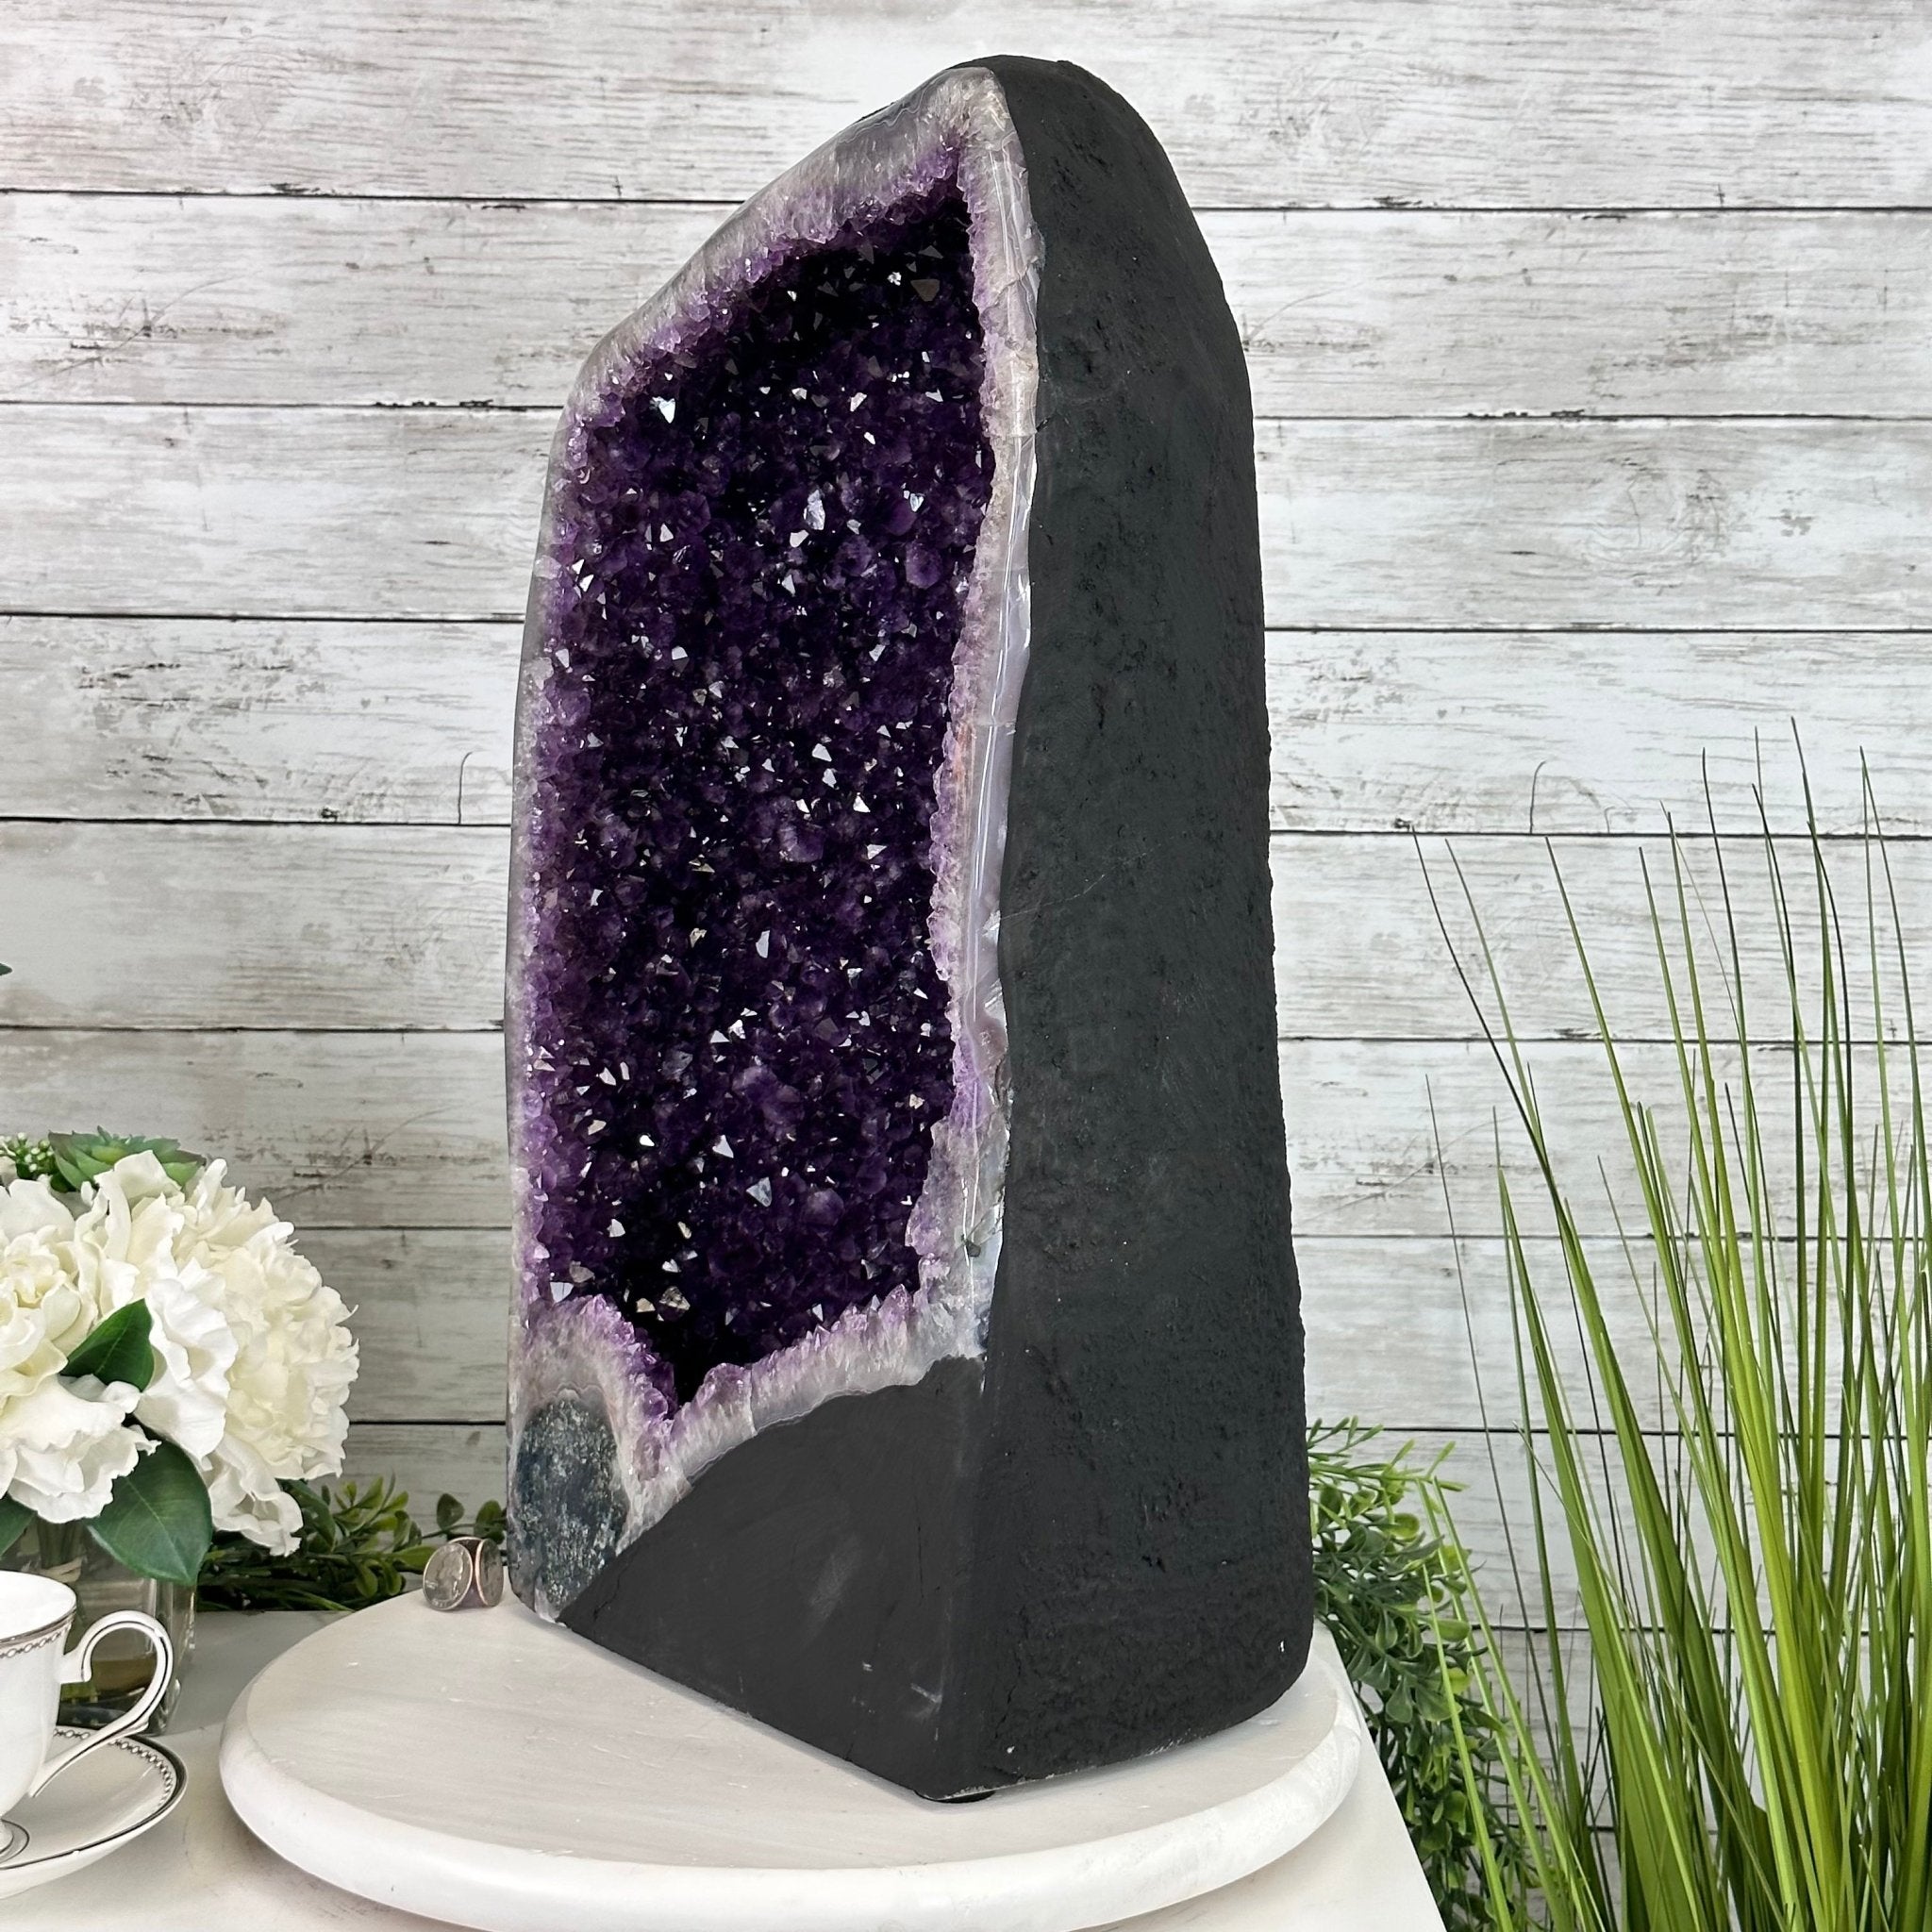 Extra Plus Quality Brazilian Amethyst Cathedral, 62.5 lbs & 21" Tall, Model #5601-0991 by Brazil Gems - Brazil GemsBrazil GemsExtra Plus Quality Brazilian Amethyst Cathedral, 62.5 lbs & 21" Tall, Model #5601-0991 by Brazil GemsCathedrals5601-0991